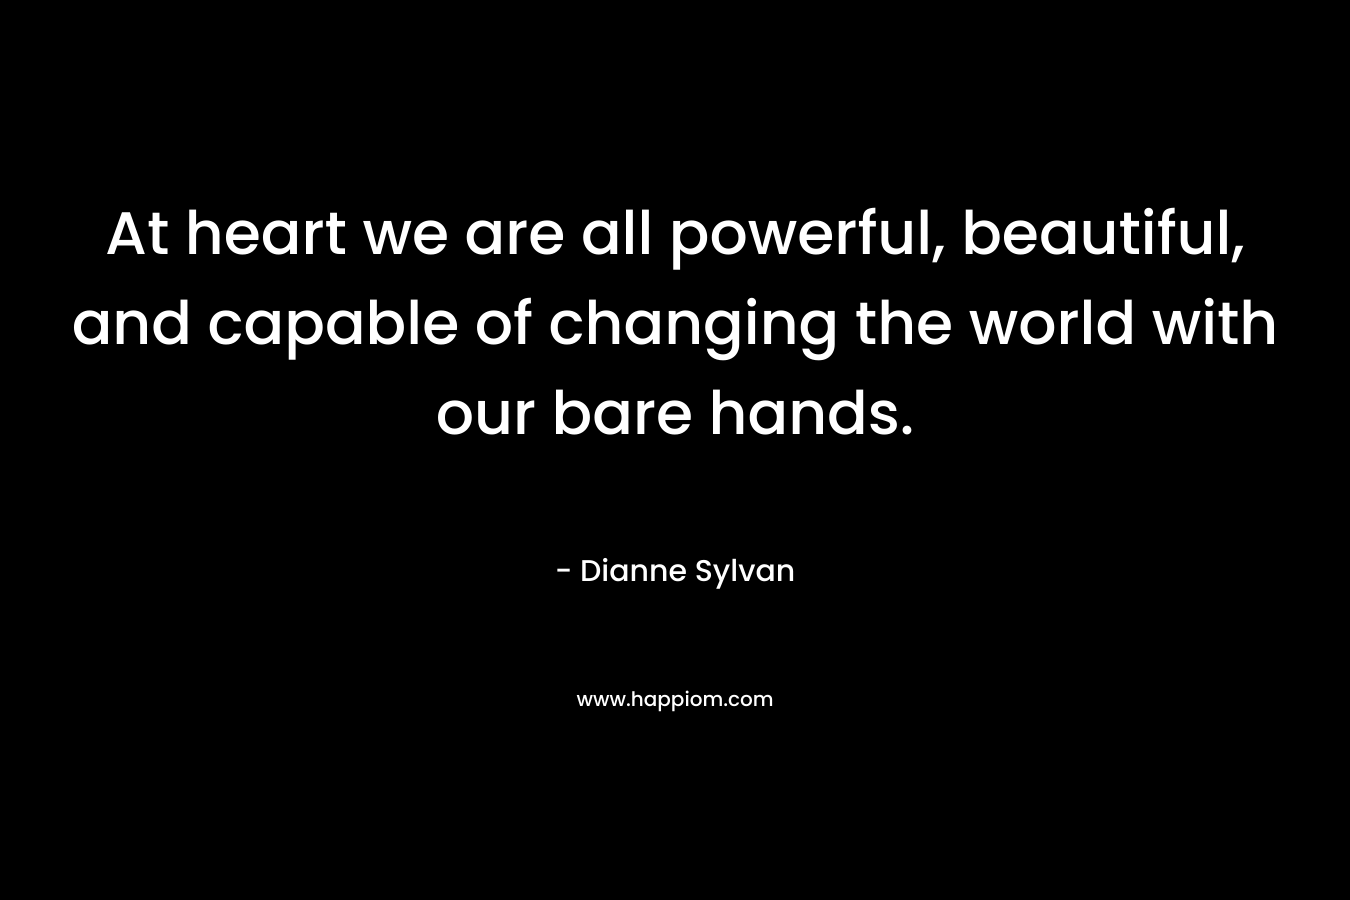 At heart we are all powerful, beautiful, and capable of changing the world with our bare hands.